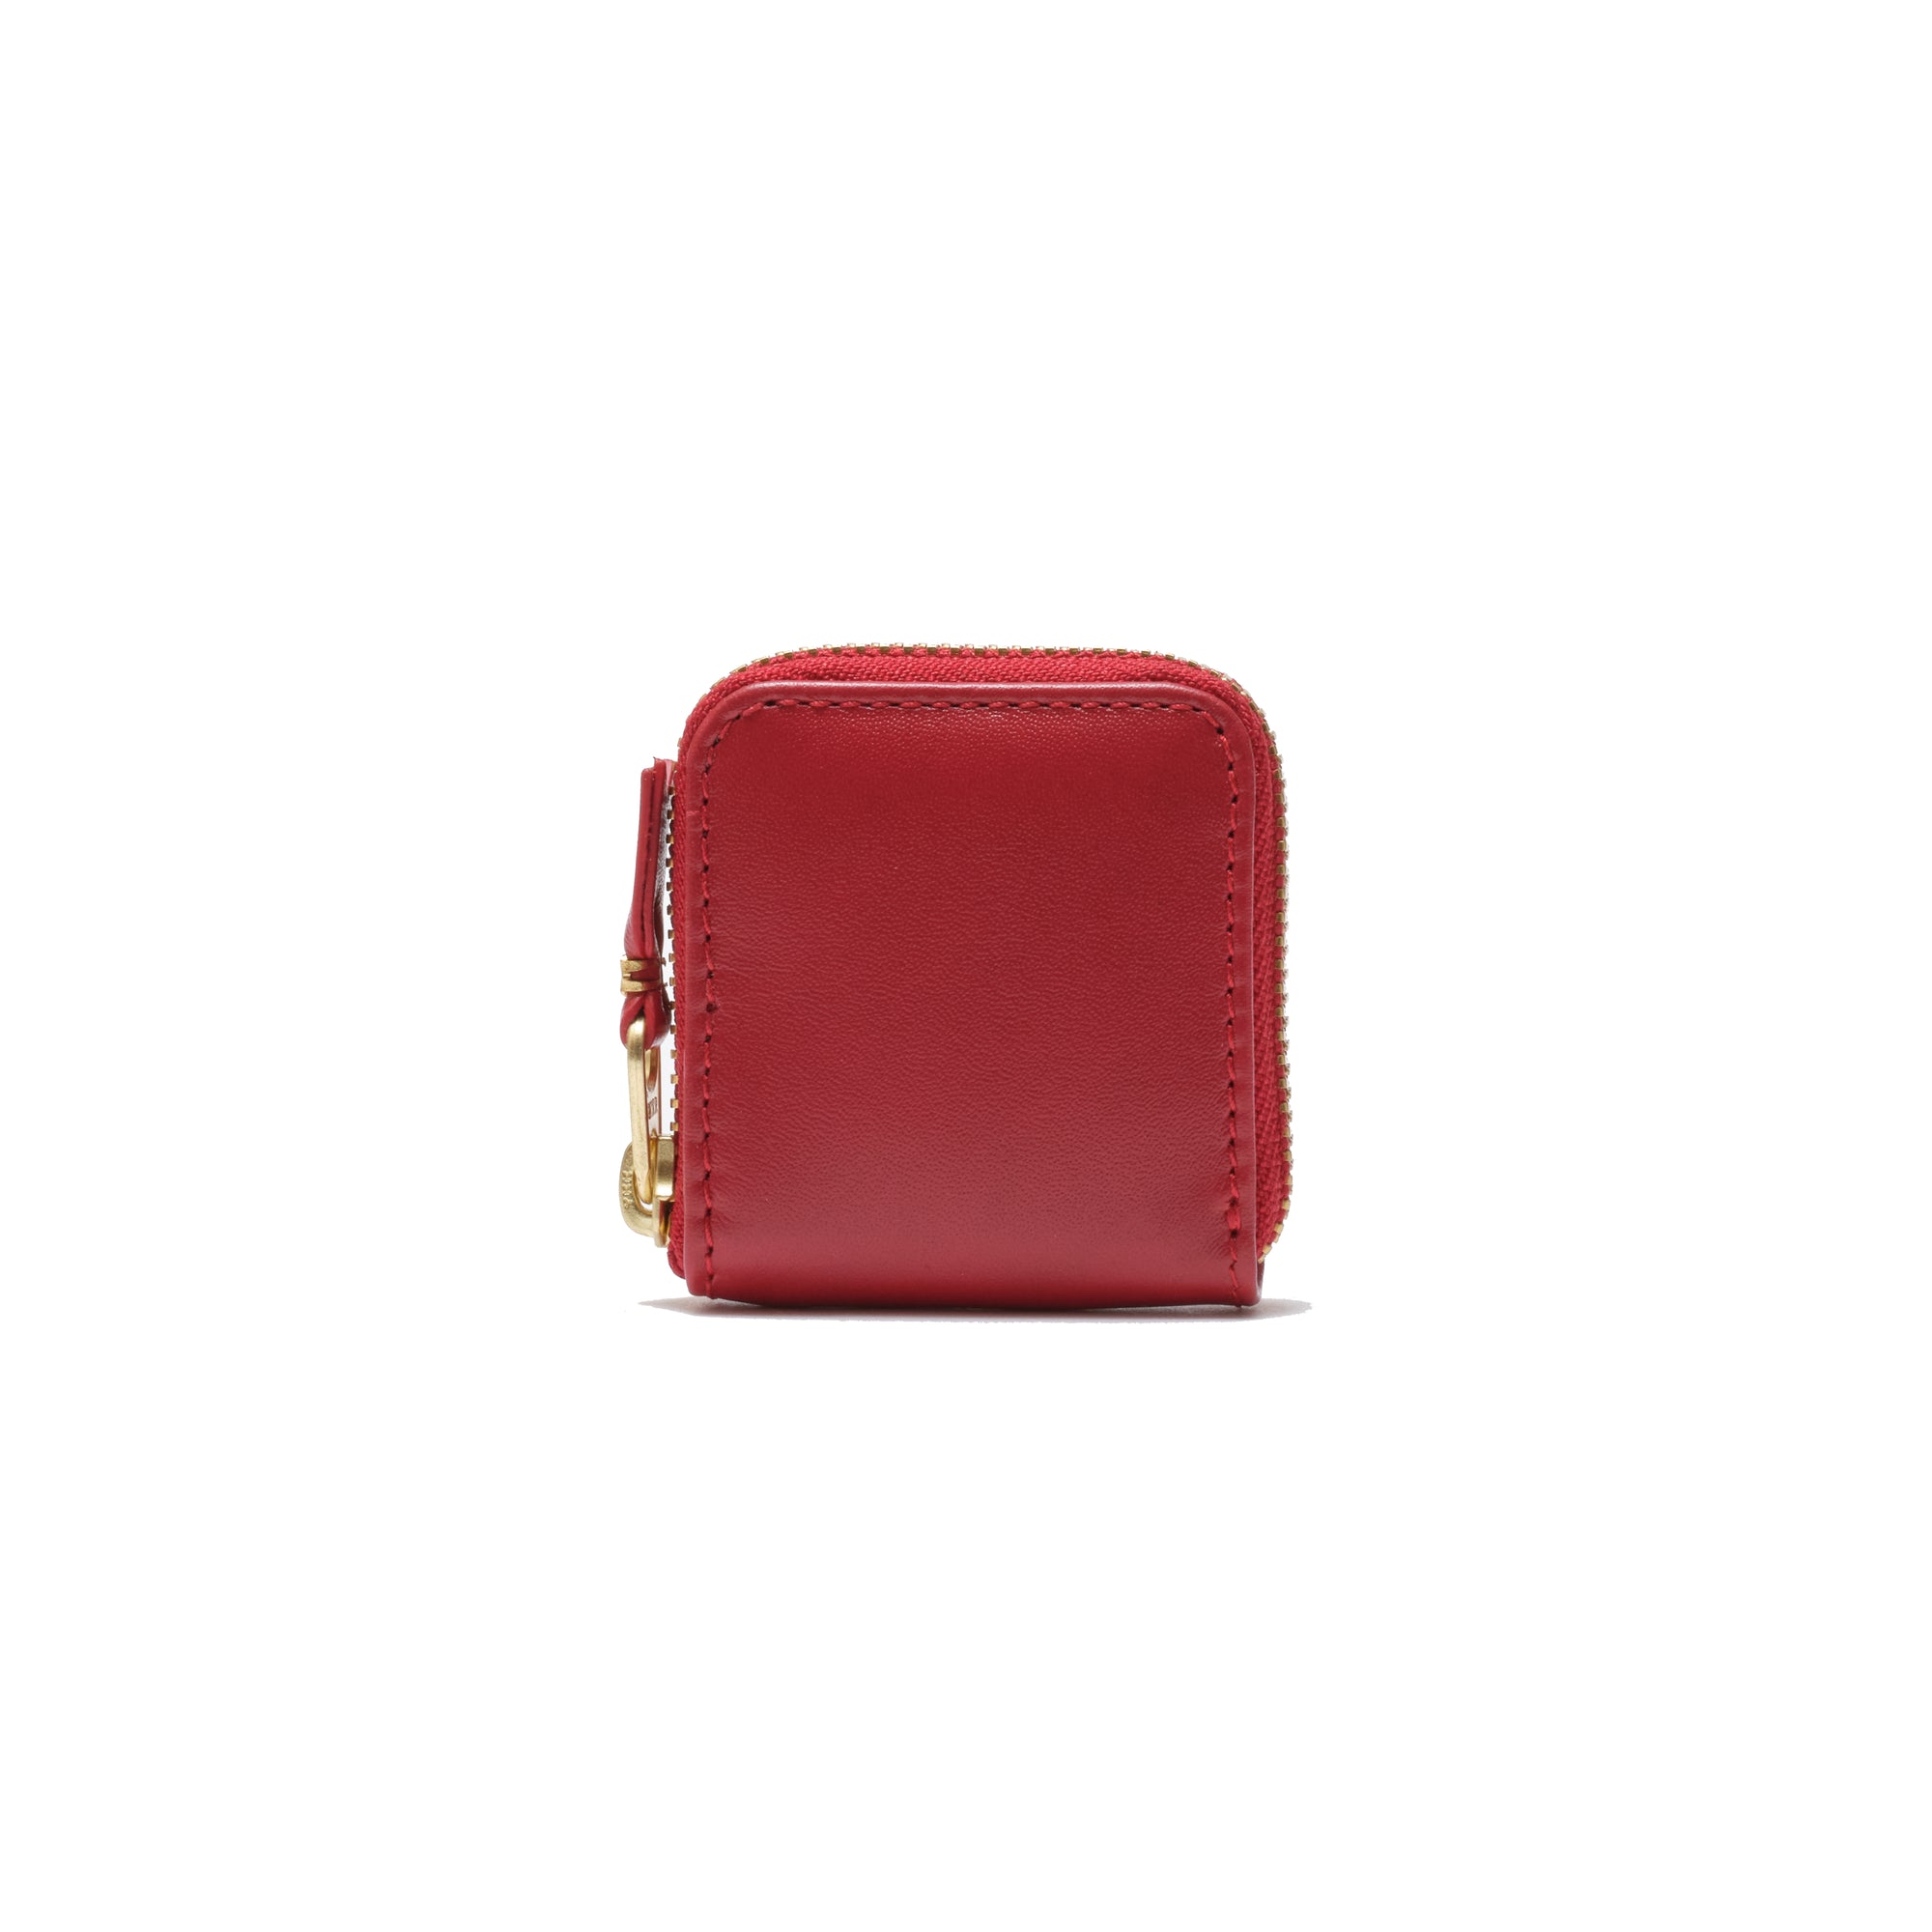 CDG WALLET - Colored Leather Line-8Z-A041 - (Red) view 1